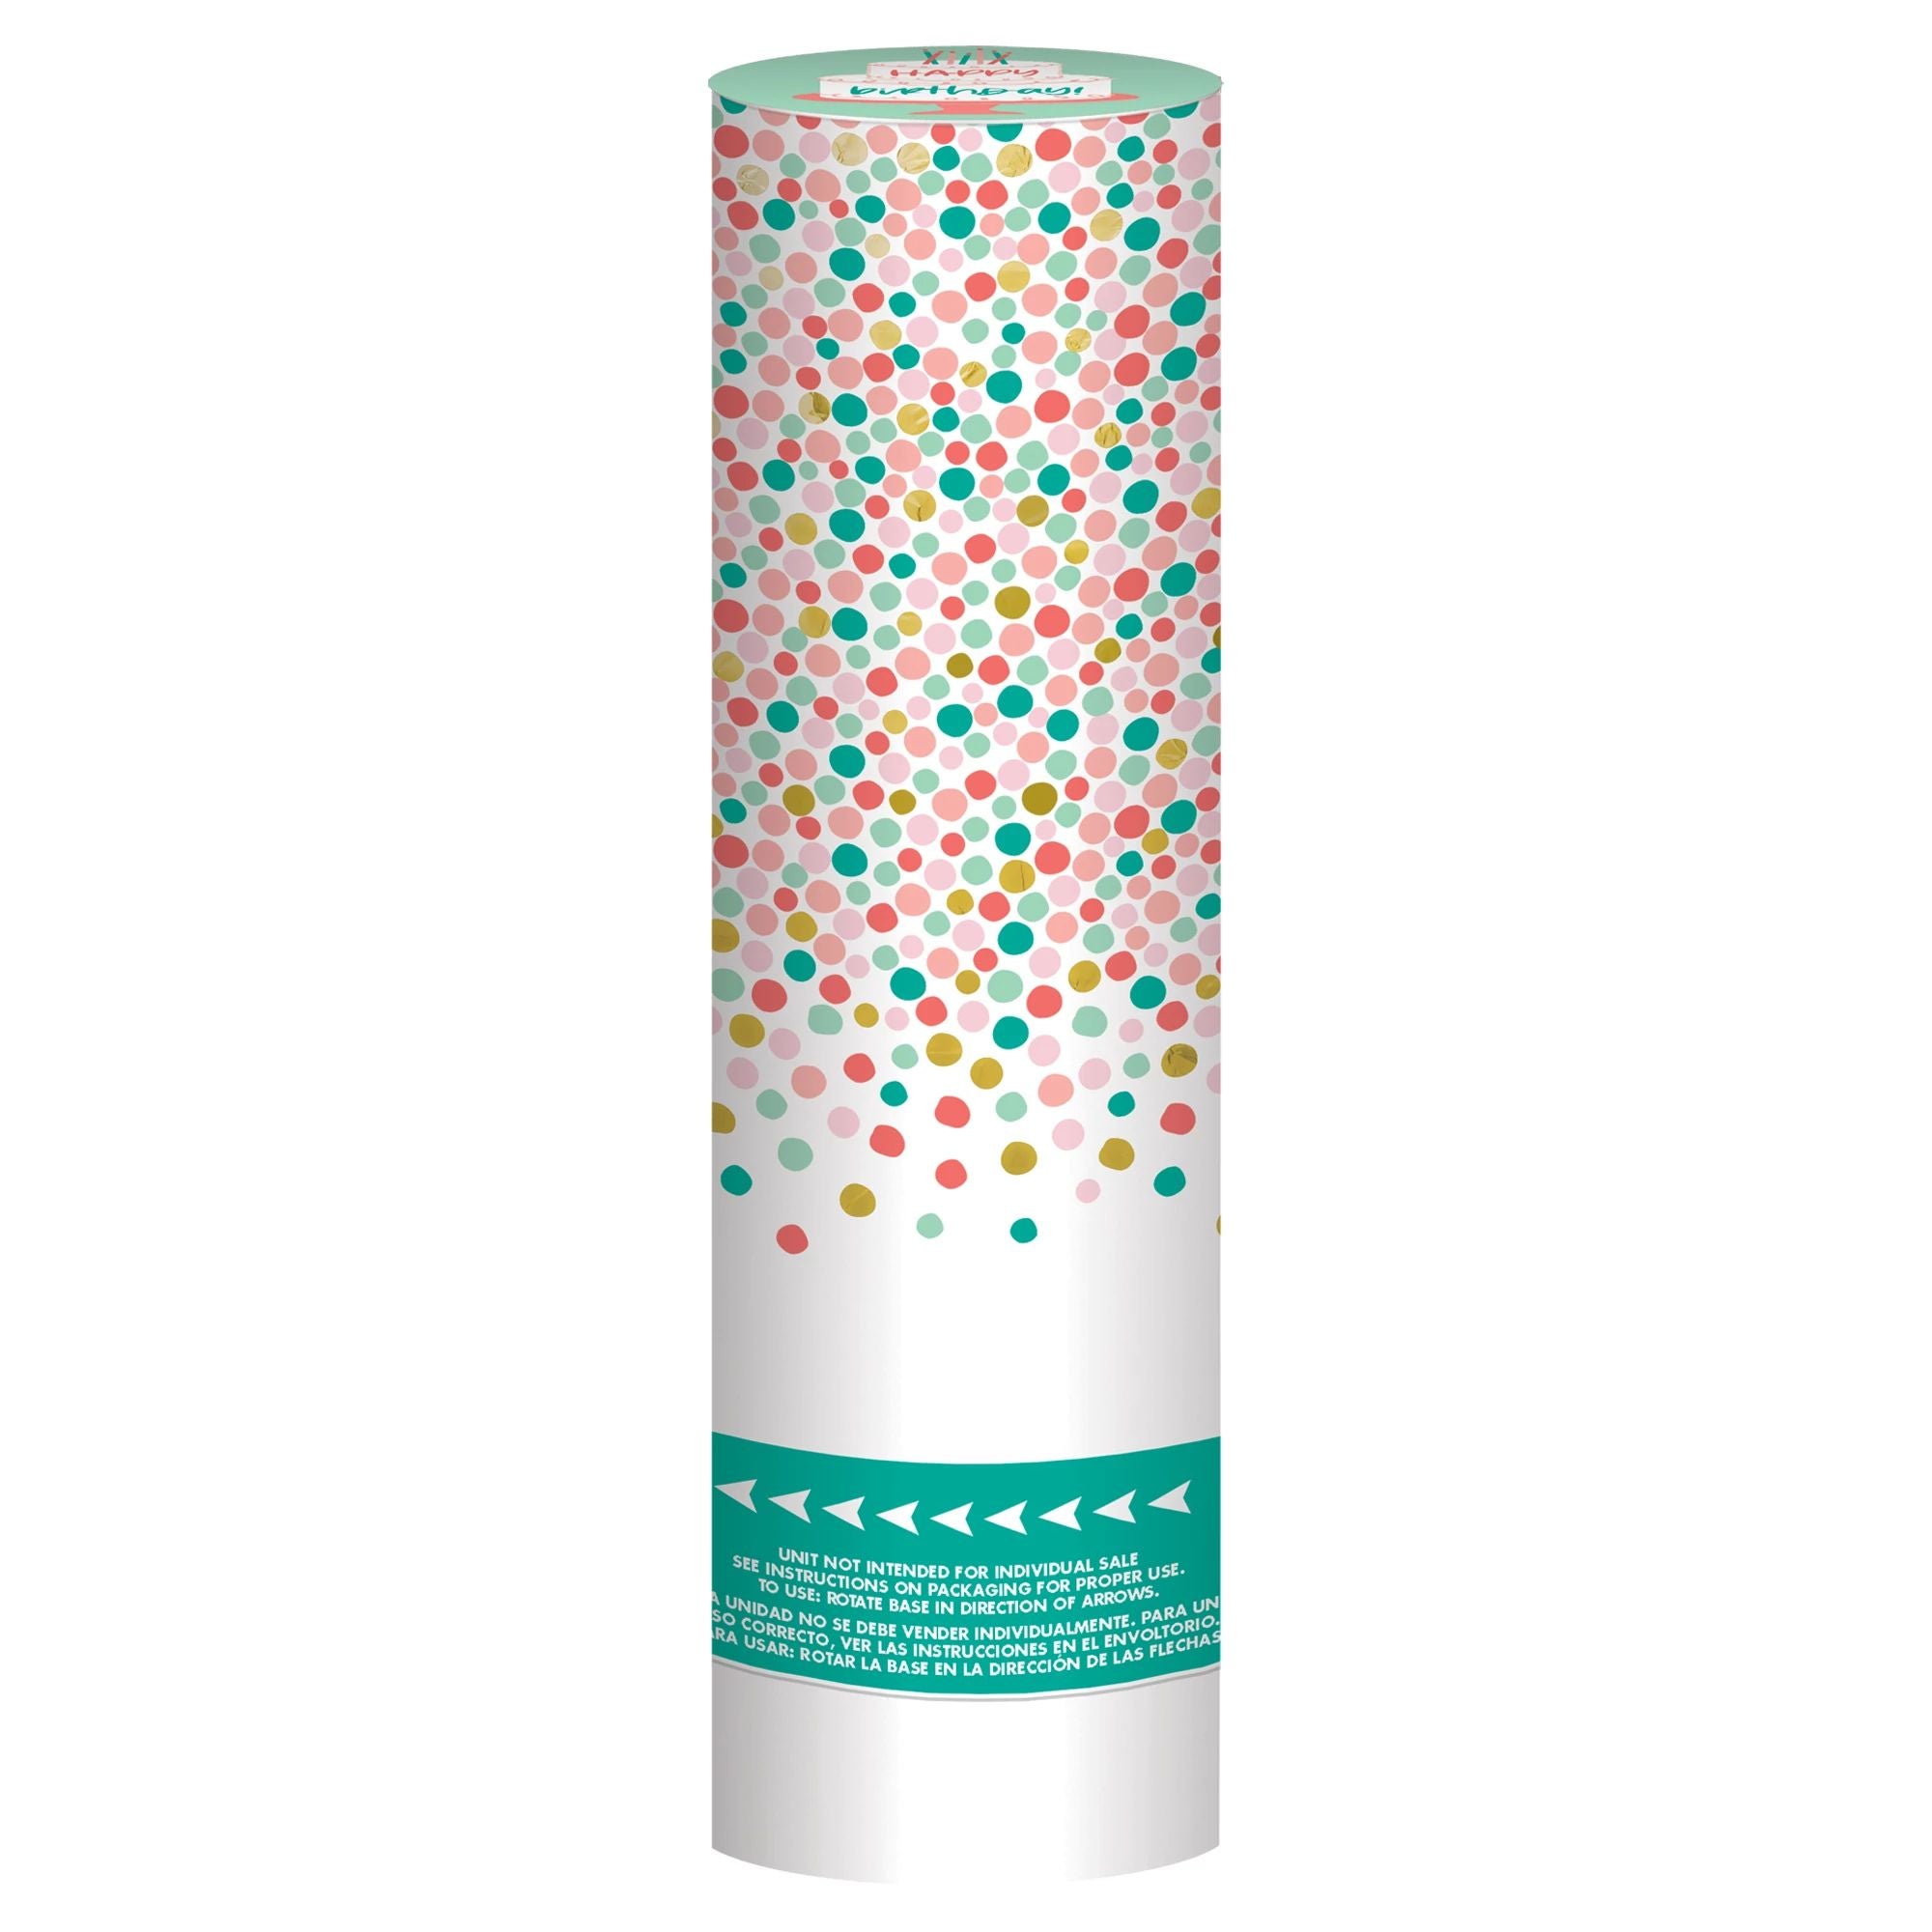 Amscan BIRTHDAY Happy Cake Day Confetti Poppers